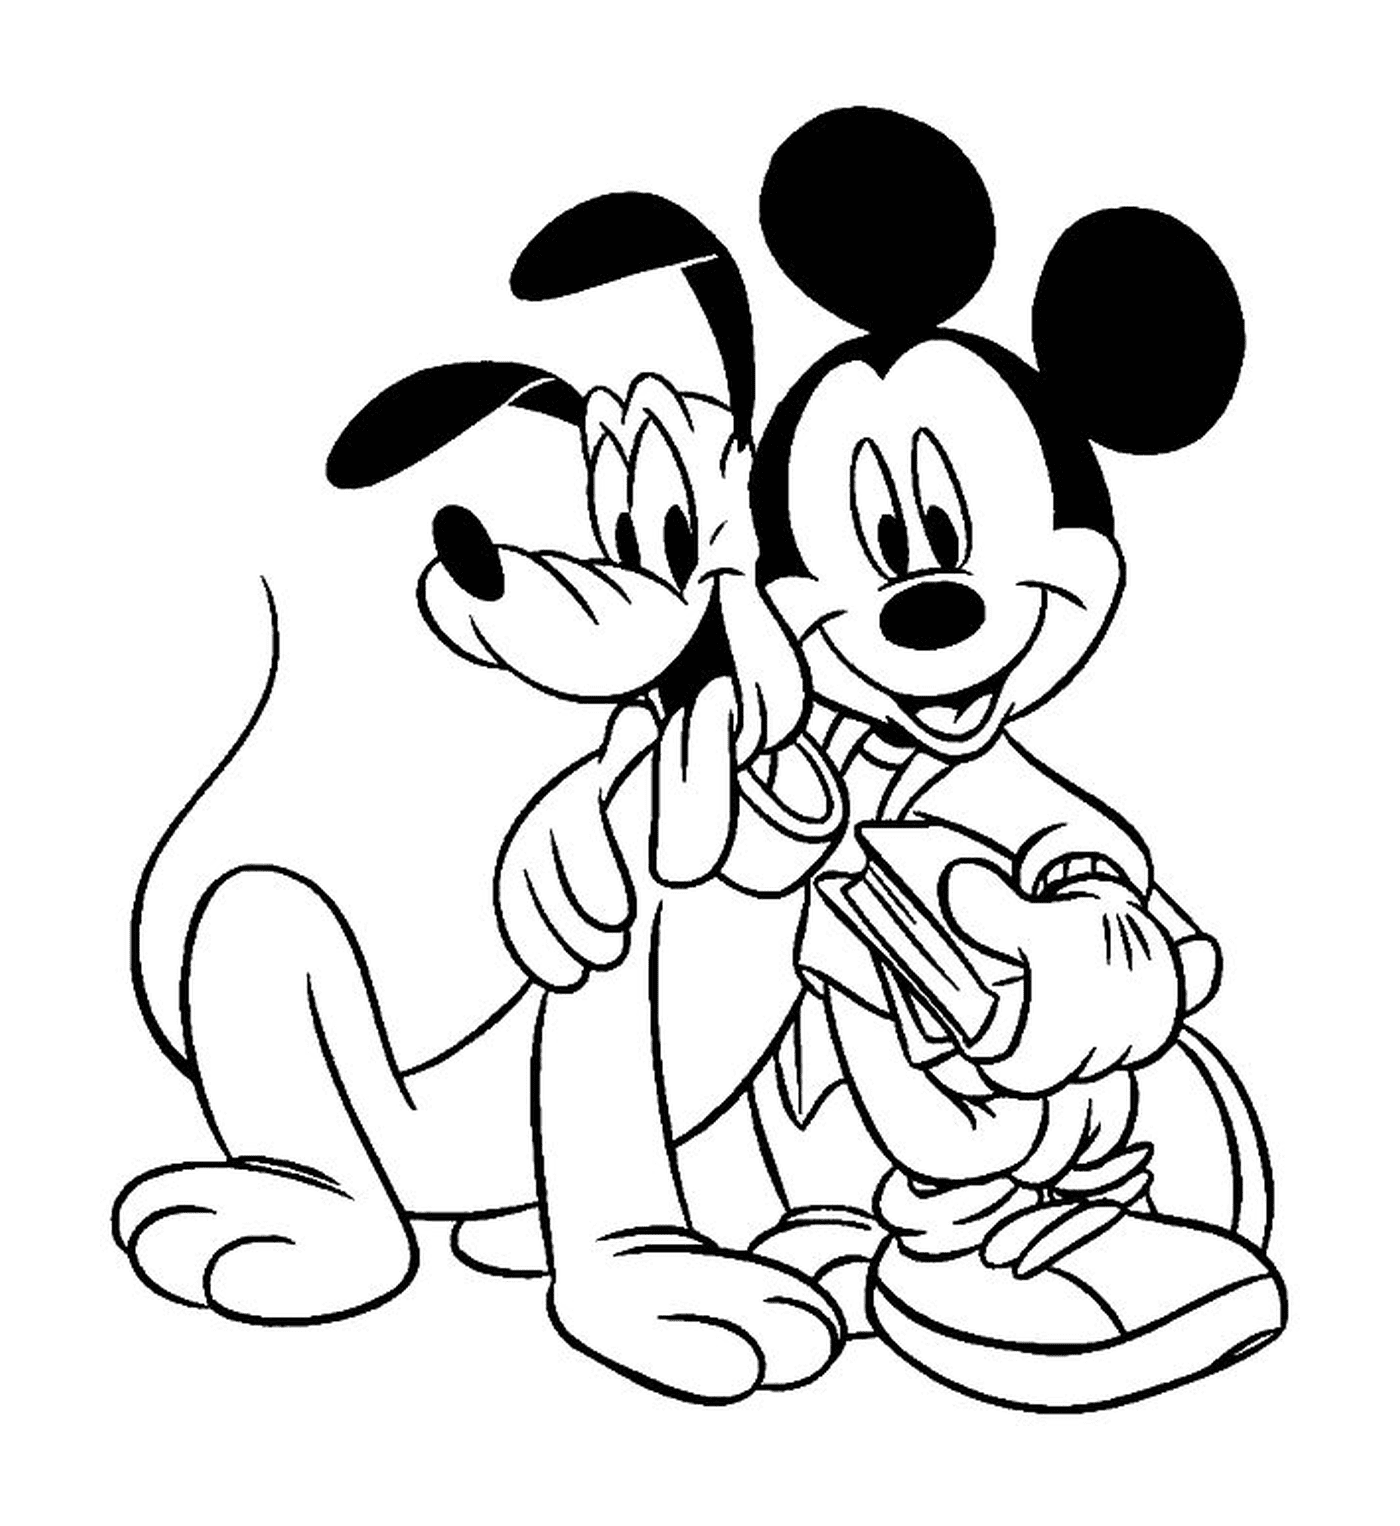  Mickey and his dog Pluto 